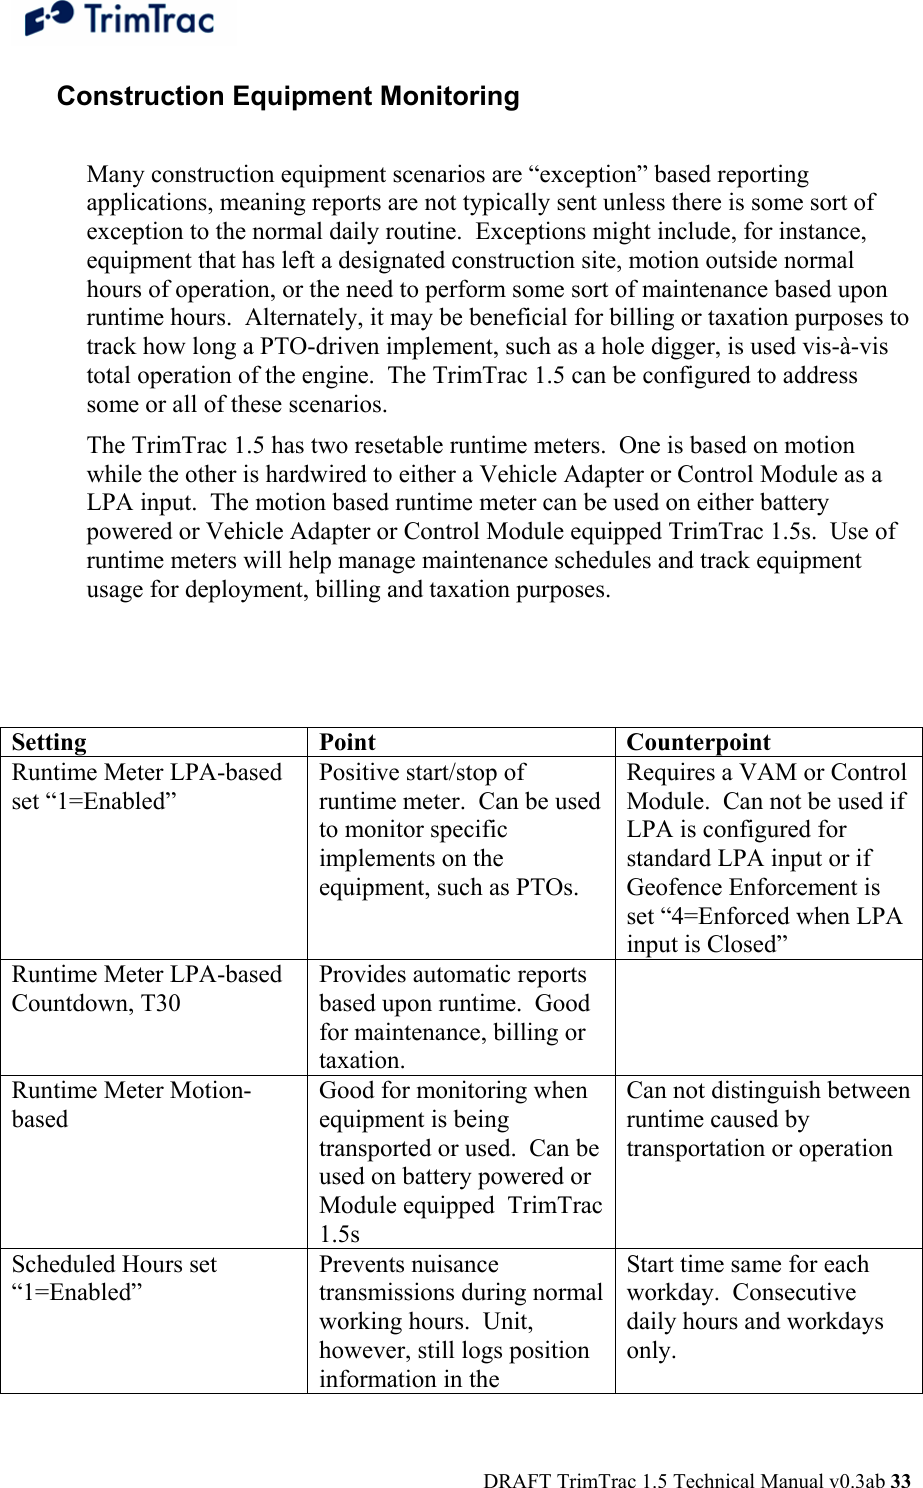  DRAFT TrimTrac 1.5 Technical Manual v0.3ab 33 Construction Equipment Monitoring  Many construction equipment scenarios are “exception” based reporting applications, meaning reports are not typically sent unless there is some sort of exception to the normal daily routine.  Exceptions might include, for instance, equipment that has left a designated construction site, motion outside normal hours of operation, or the need to perform some sort of maintenance based upon runtime hours.  Alternately, it may be beneficial for billing or taxation purposes to track how long a PTO-driven implement, such as a hole digger, is used vis-à-vis total operation of the engine.  The TrimTrac 1.5 can be configured to address some or all of these scenarios. The TrimTrac 1.5 has two resetable runtime meters.  One is based on motion while the other is hardwired to either a Vehicle Adapter or Control Module as a LPA input.  The motion based runtime meter can be used on either battery powered or Vehicle Adapter or Control Module equipped TrimTrac 1.5s.  Use of runtime meters will help manage maintenance schedules and track equipment usage for deployment, billing and taxation purposes.    Setting Point  Counterpoint Runtime Meter LPA-based set “1=Enabled”  Positive start/stop of runtime meter.  Can be used to monitor specific implements on the equipment, such as PTOs.  Requires a VAM or Control Module.  Can not be used if LPA is configured for standard LPA input or if Geofence Enforcement is set “4=Enforced when LPA input is Closed” Runtime Meter LPA-based Countdown, T30 Provides automatic reports based upon runtime.  Good for maintenance, billing or taxation.  Runtime Meter Motion-based Good for monitoring when equipment is being transported or used.  Can be used on battery powered or Module equipped  TrimTrac 1.5s Can not distinguish between runtime caused by transportation or operation Scheduled Hours set “1=Enabled” Prevents nuisance transmissions during normal working hours.  Unit, however, still logs position information in the Start time same for each workday.  Consecutive daily hours and workdays only.   